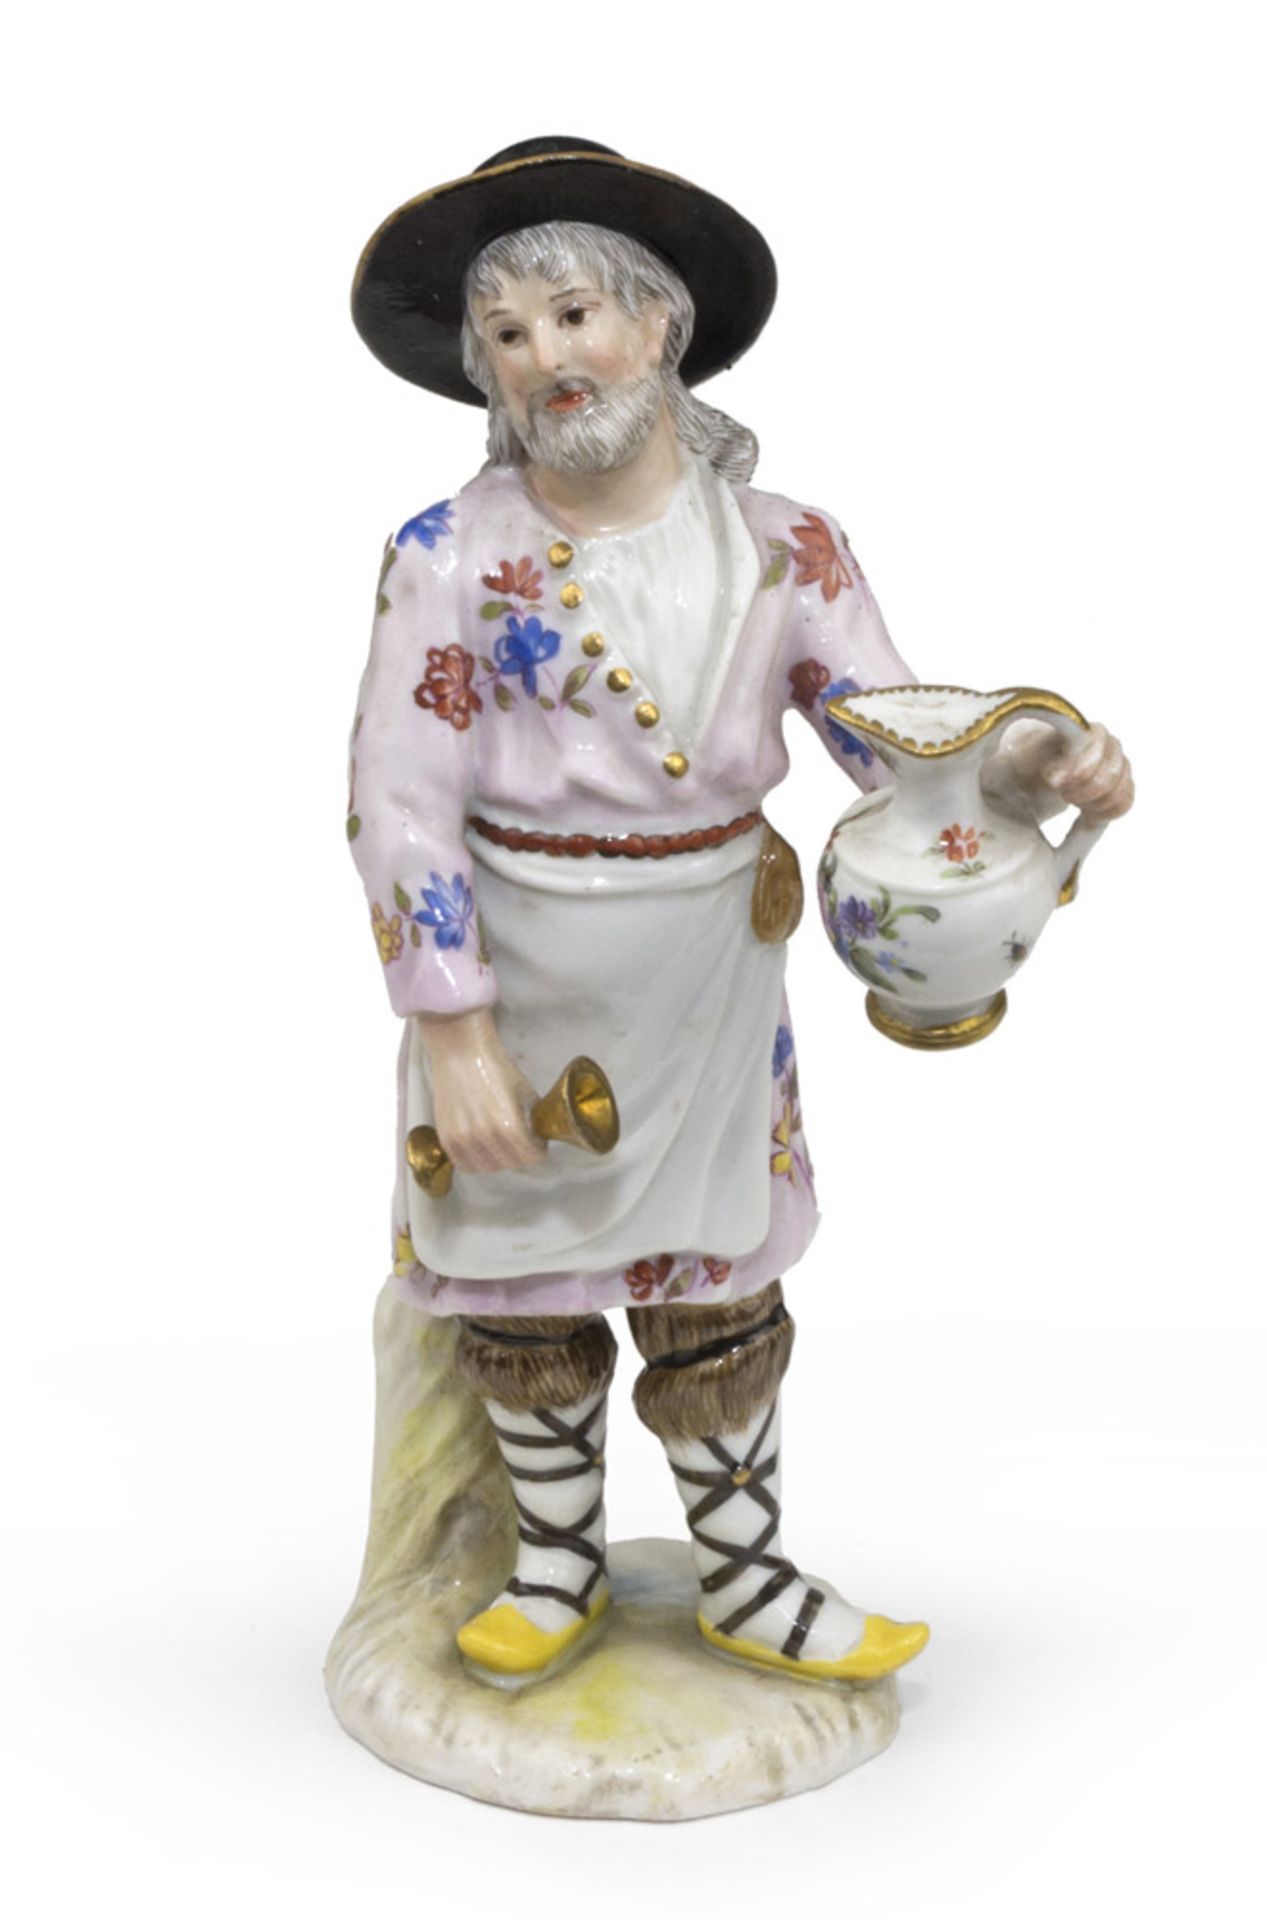 PORCELAIN FIGURE, PROBABLY GERMANY 19TH CENTURY